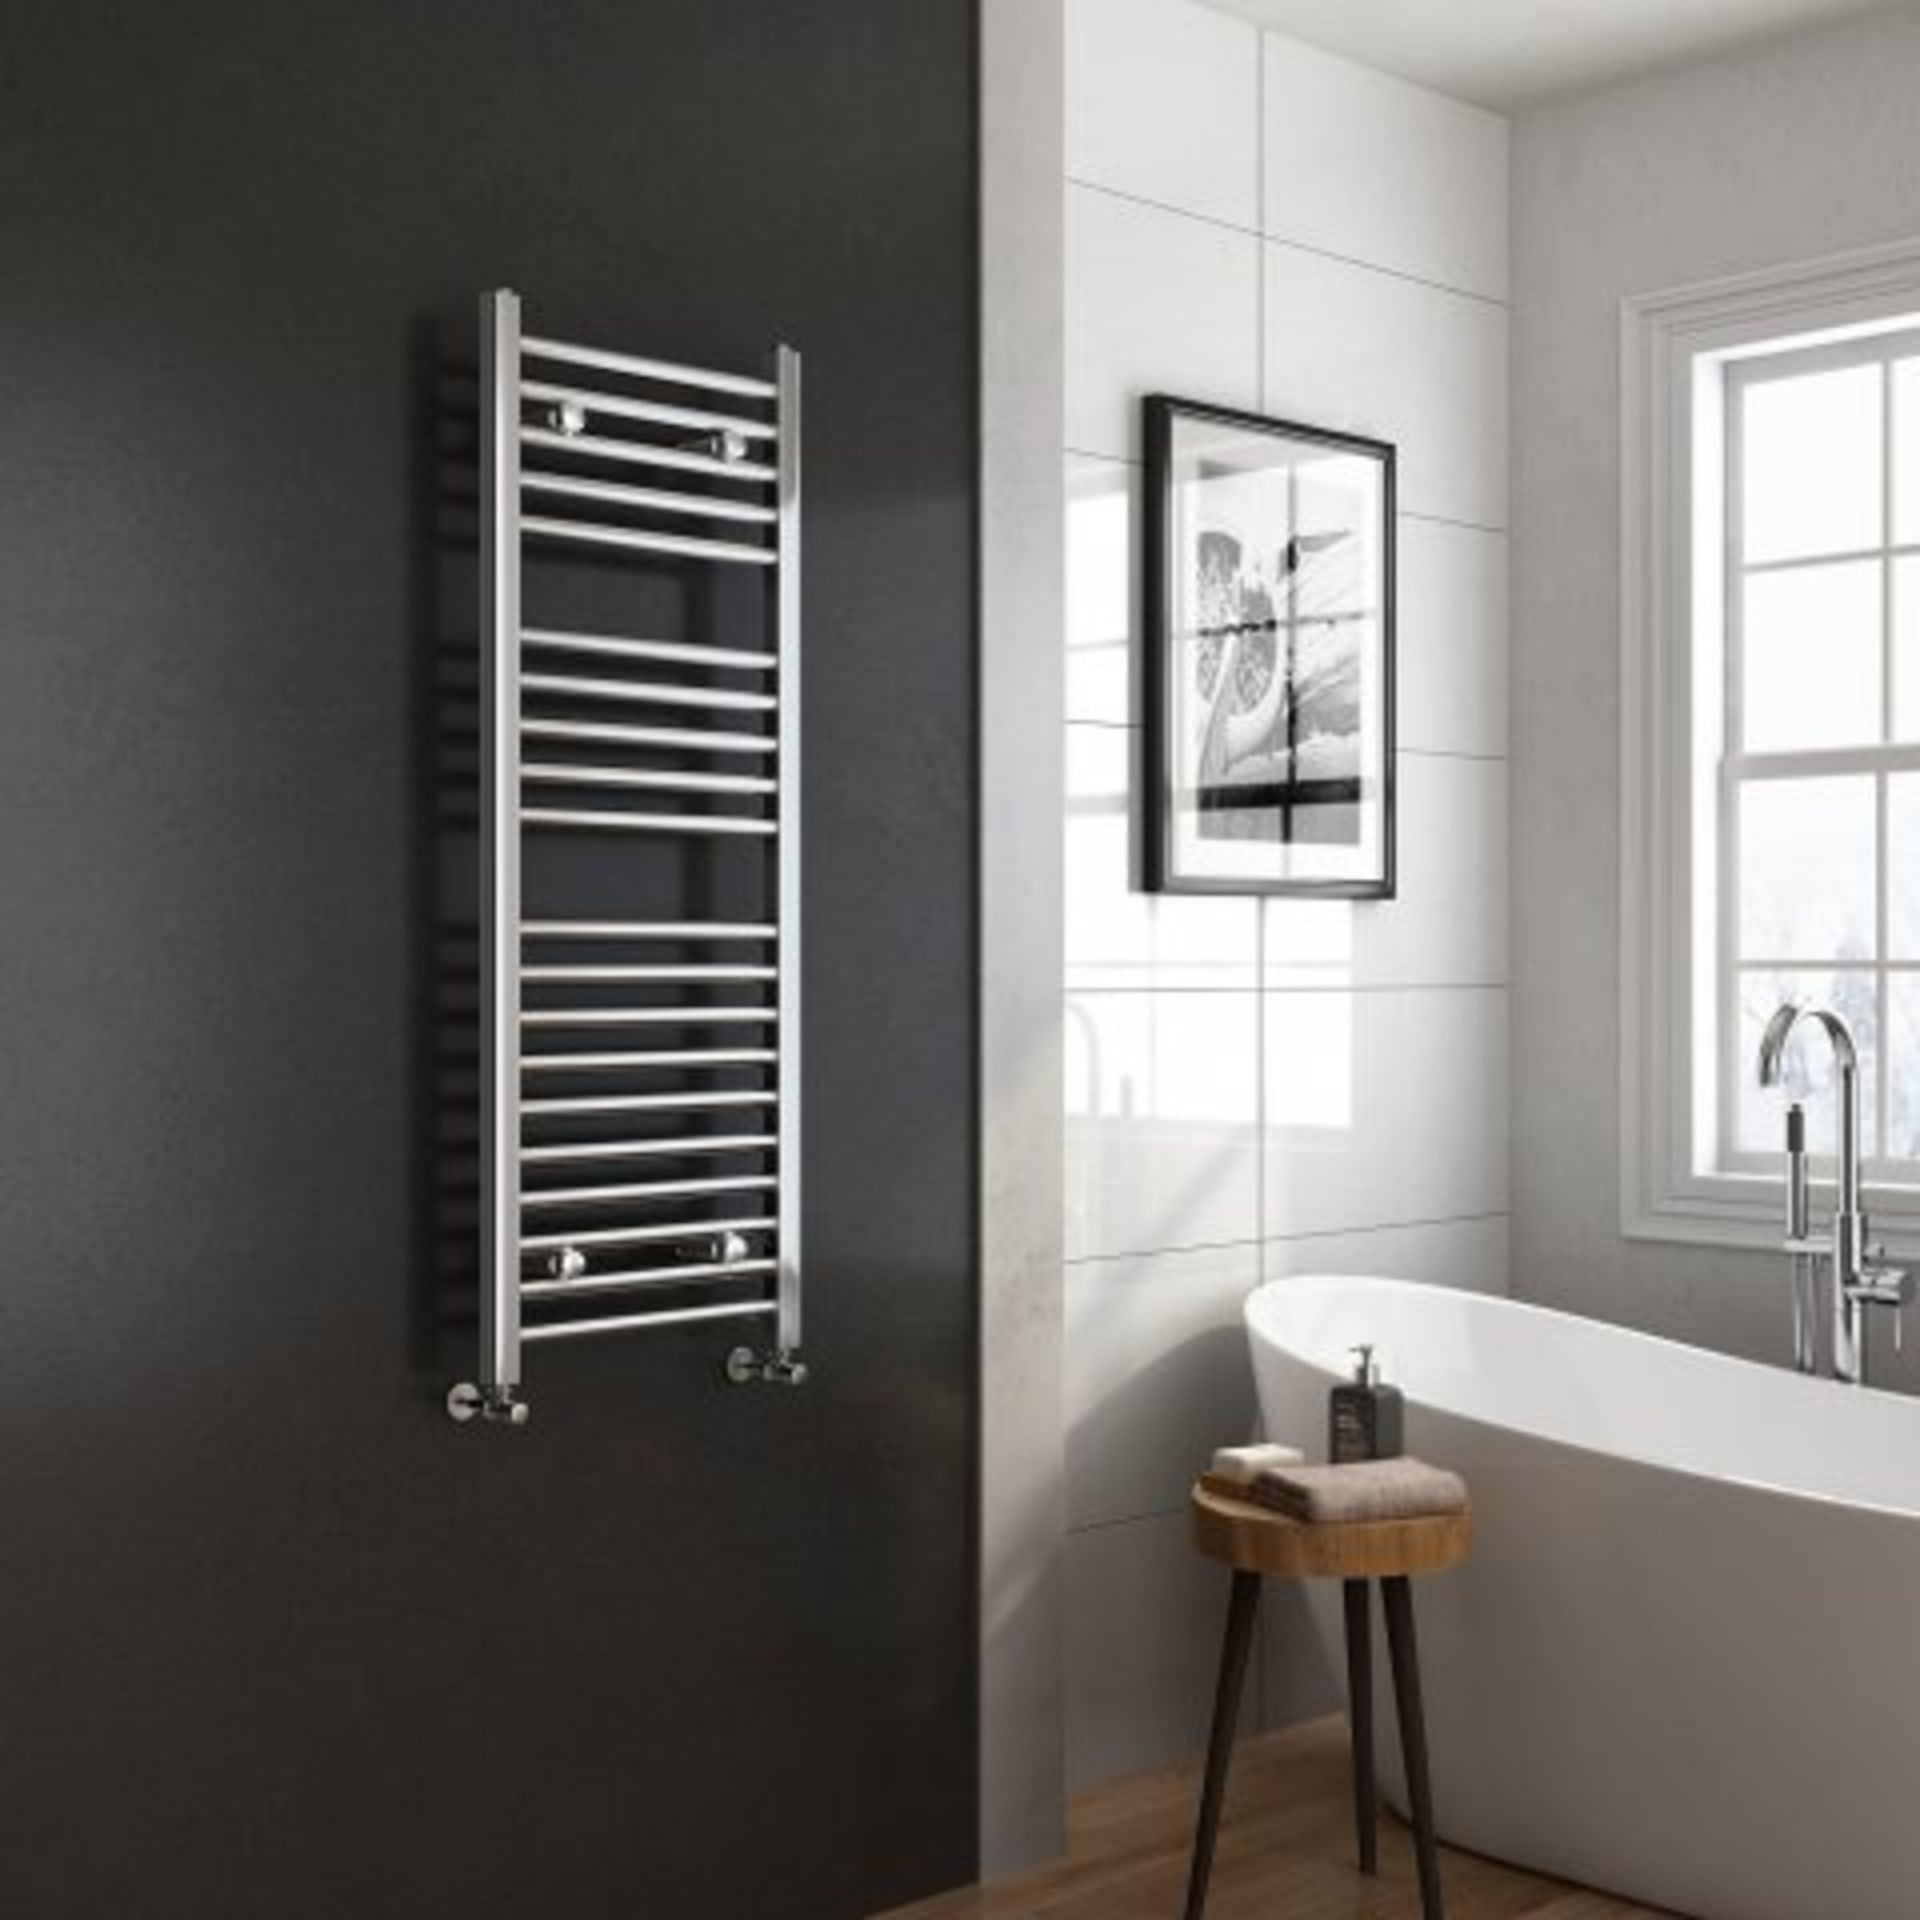 (L44) 1200x450mm - 25mm Tubes - Chrome Heated Straight Rail Ladder Towel Radiator Benefit from the - Image 2 of 8